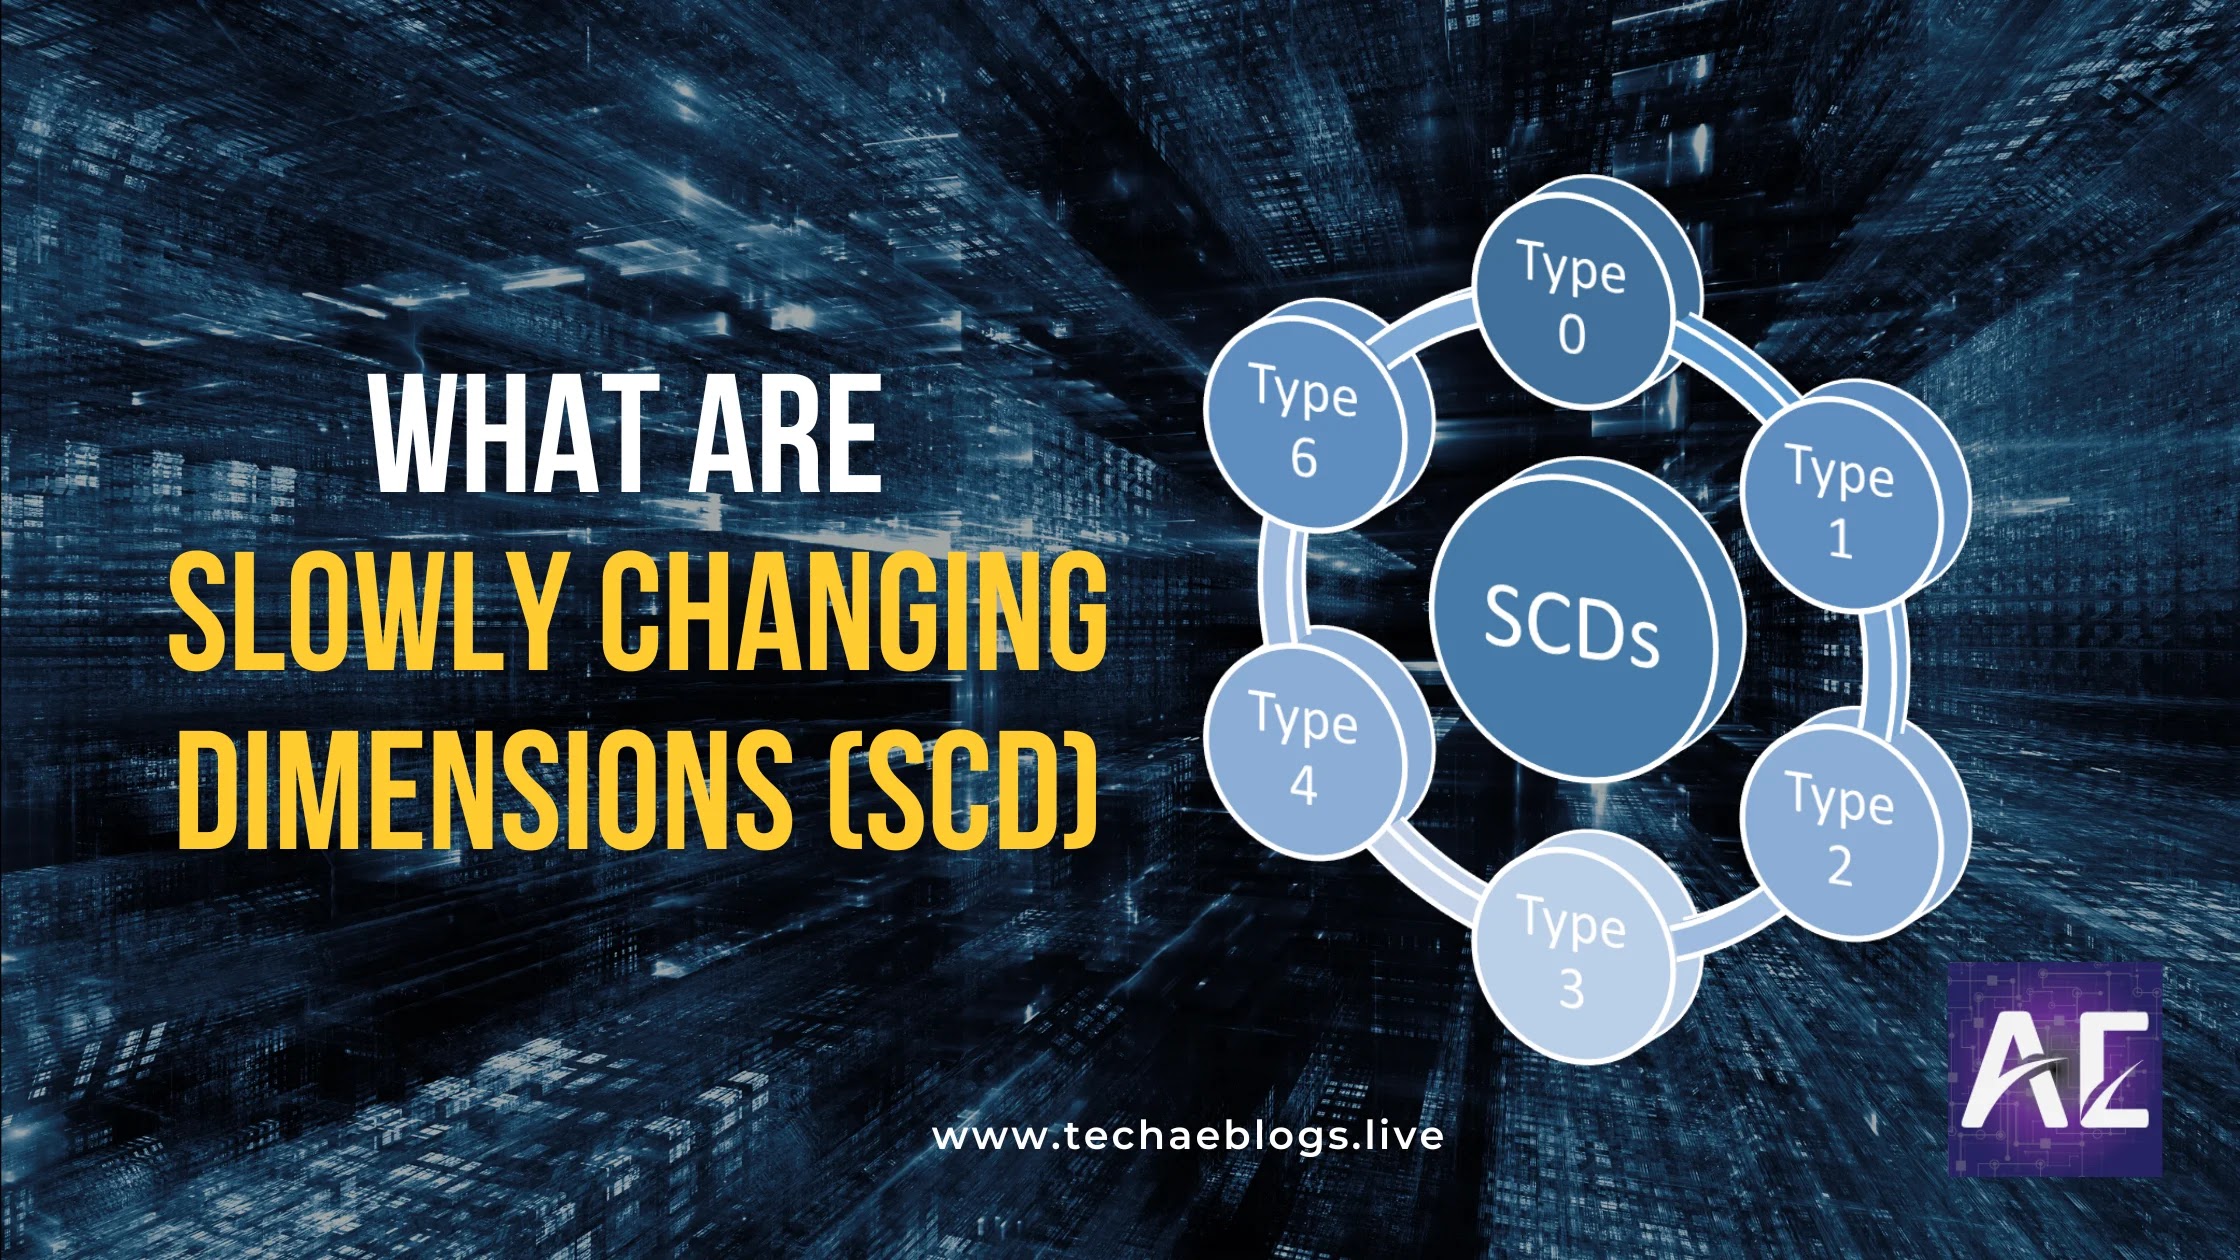 What Are Slowly Changing Dimensions (SCDs)